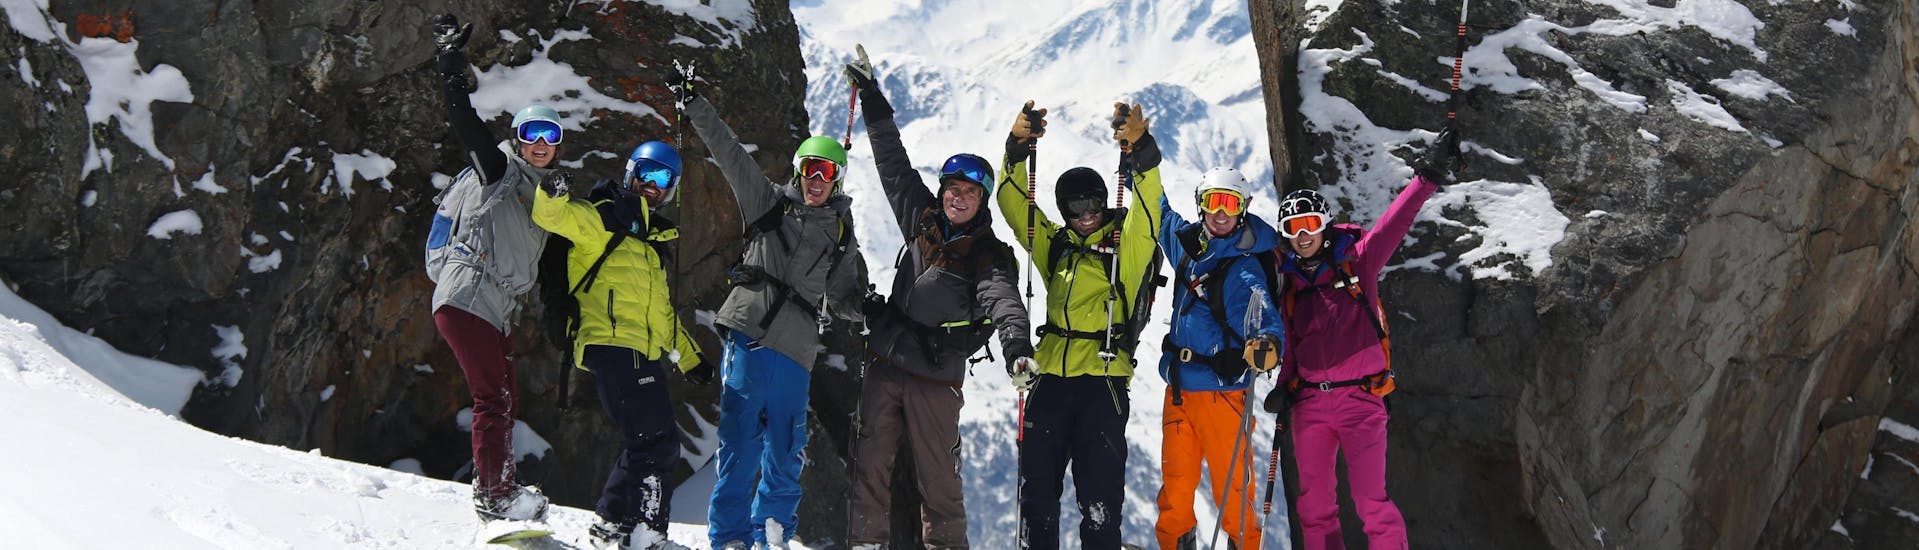 A group of friends are taking a few pictures during their Adult Ski Lessons + Ski Pass for Beginners organised by the ski school Prosneige Val d'Isère.